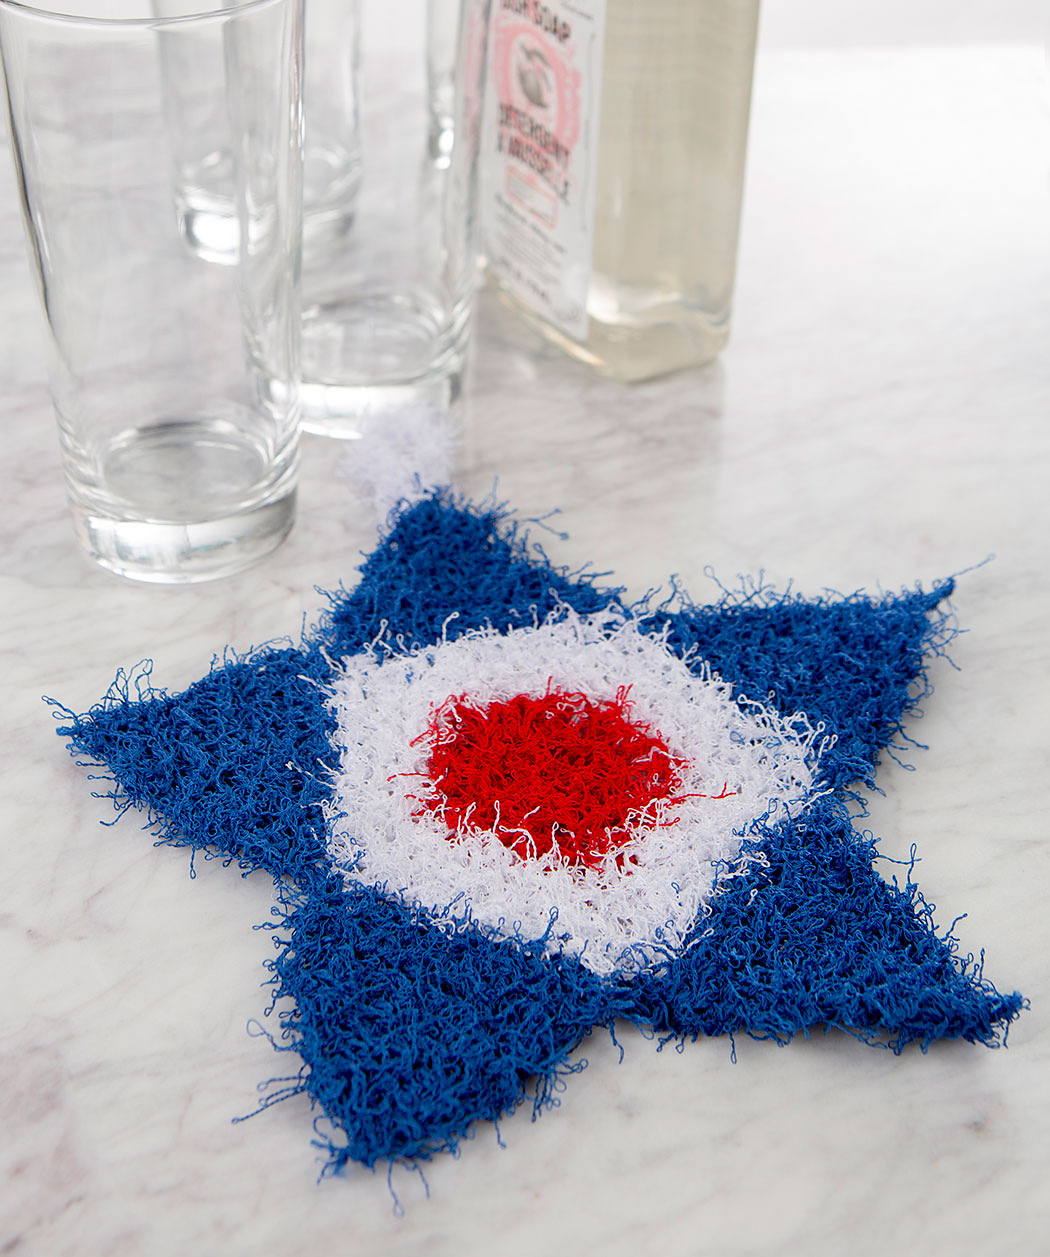 Free Knitting Pattern for Patriotic Star Scrubby